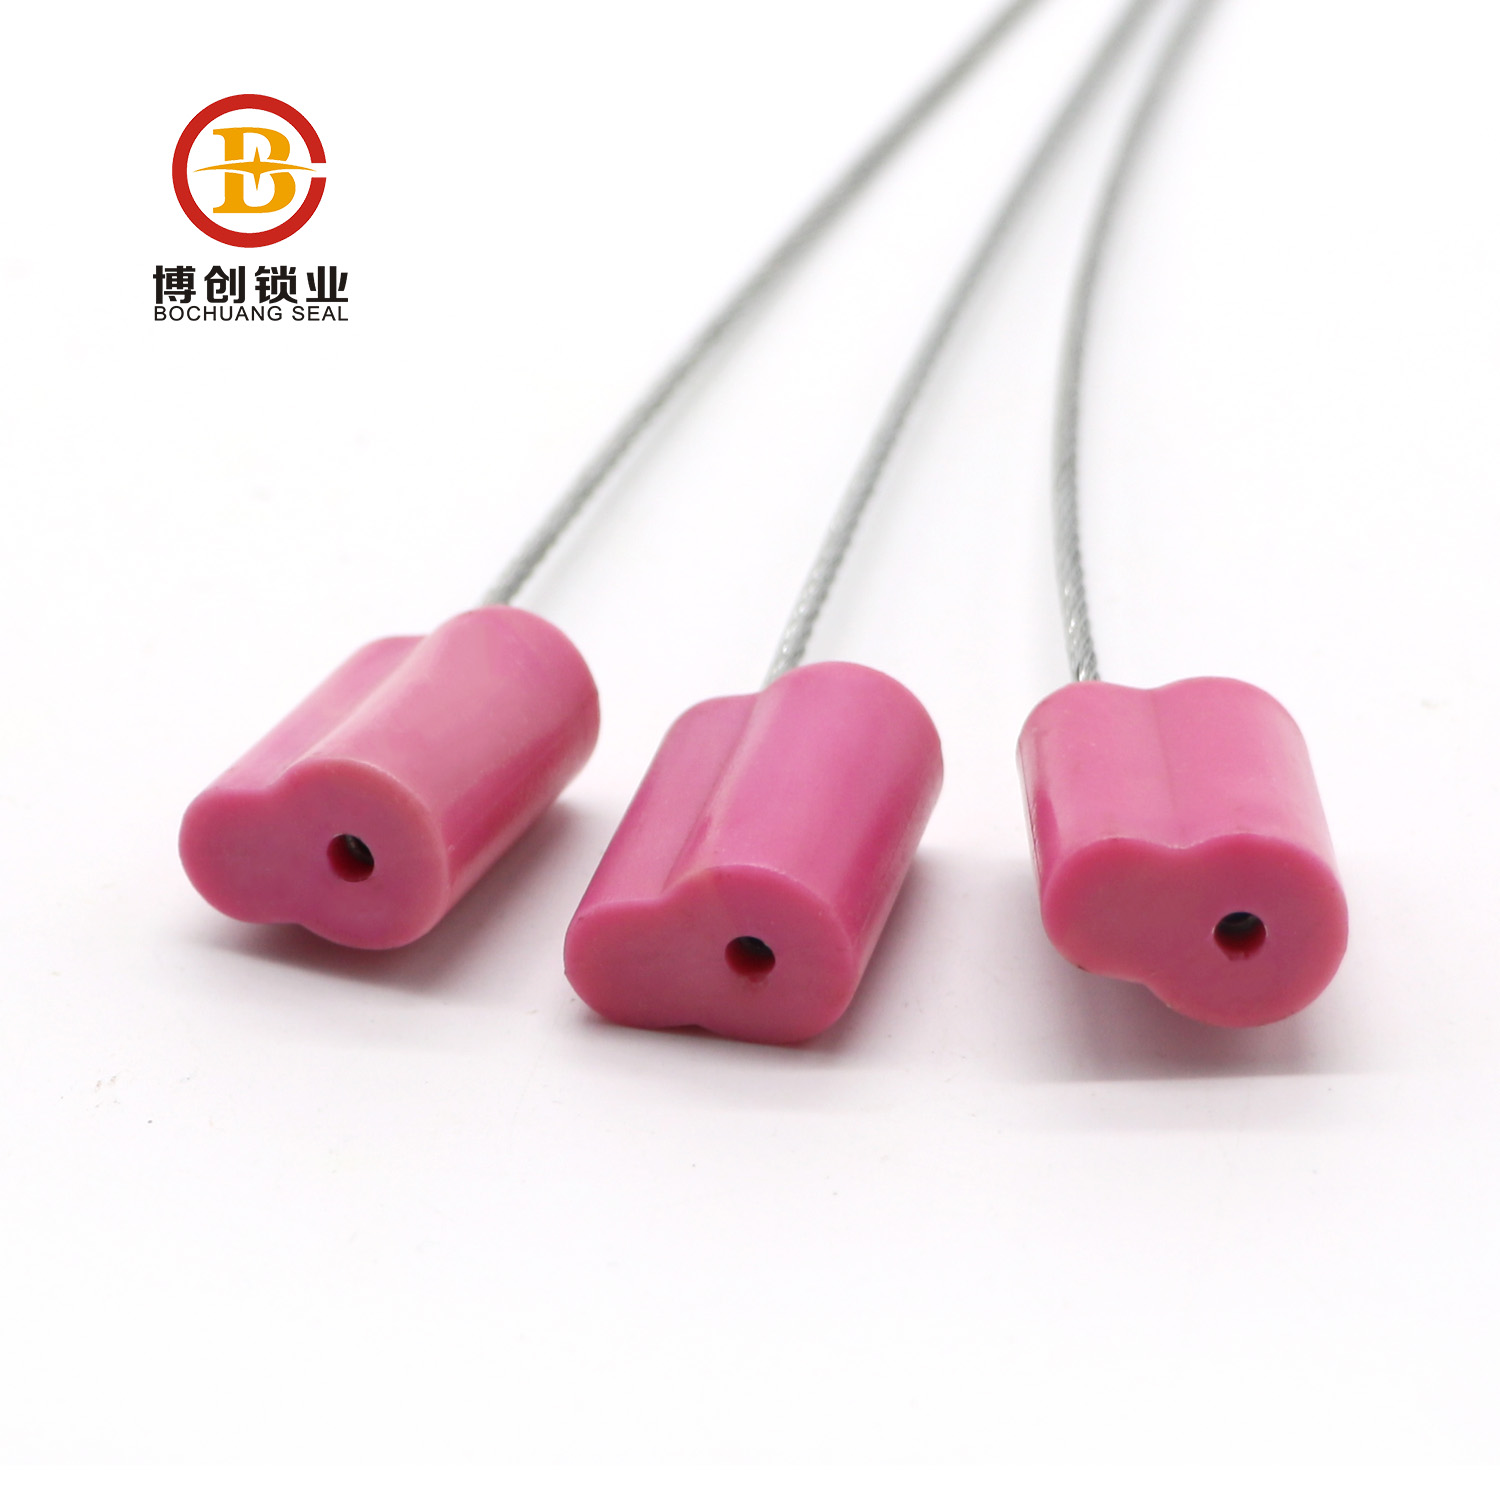 High security wire cable seal